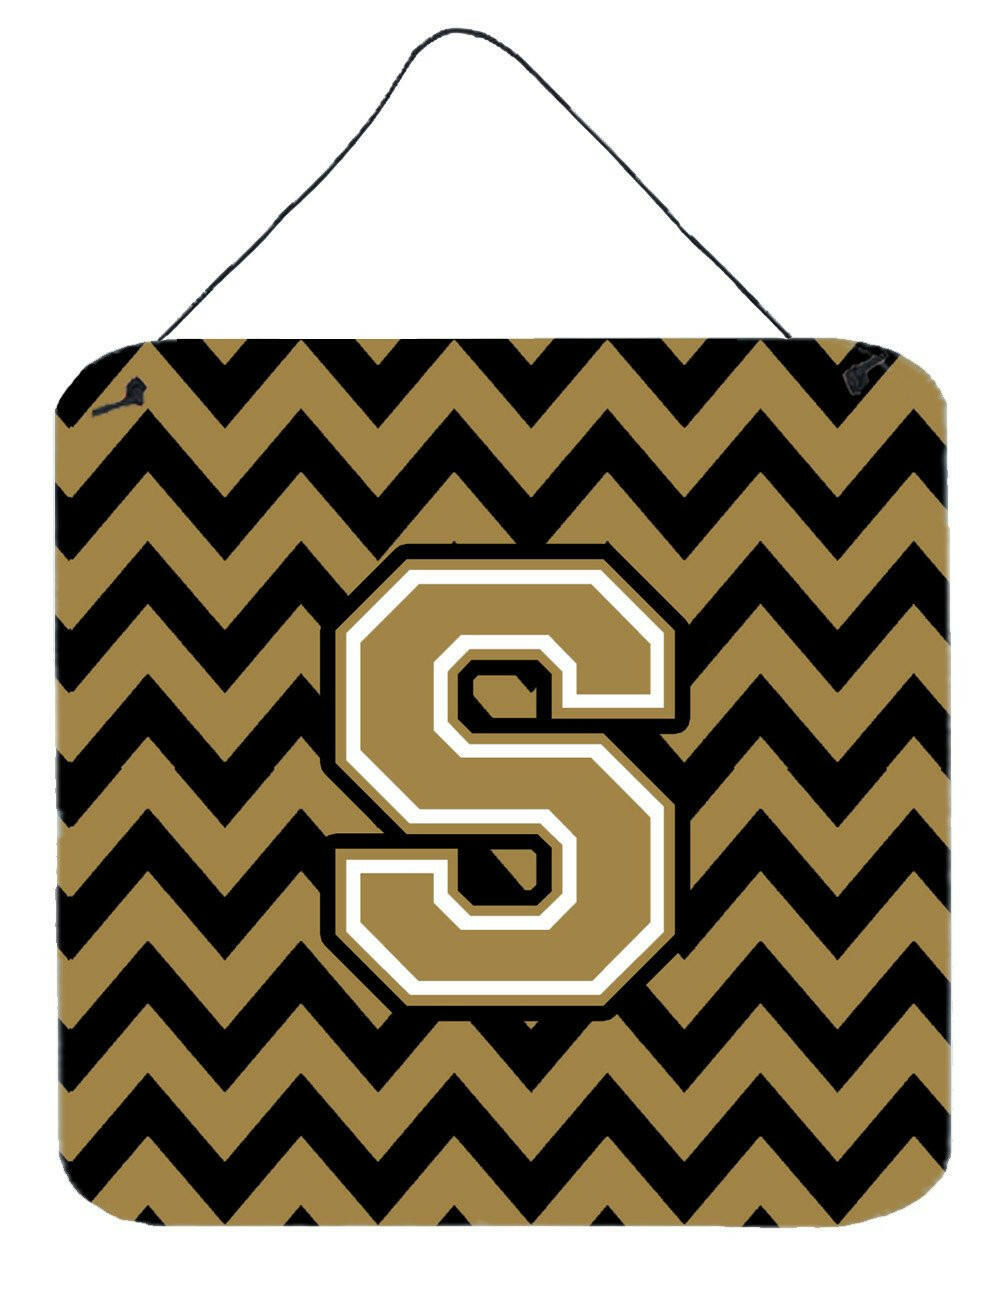 Letter S Chevron Black and Gold  Wall or Door Hanging Prints CJ1050-SDS66 by Caroline's Treasures